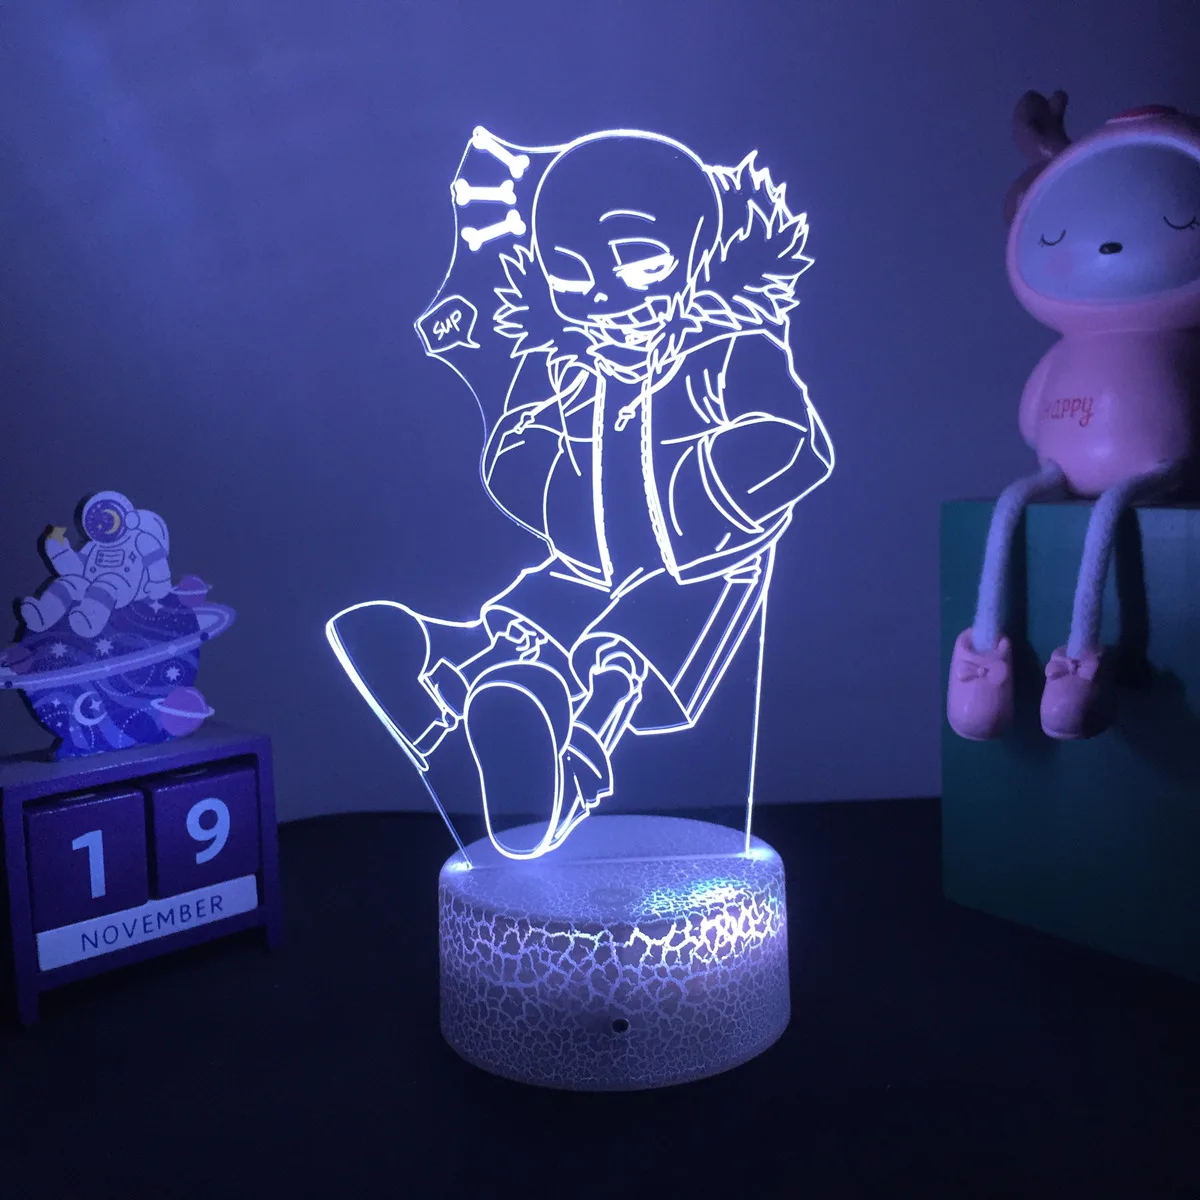 holiday nights of lights Hot Game Undertale LED Table Lamp Figure Sans And Frisk 3D night light for Bedroom Decoration xmas gift anime lamp 3d night light Night Lights